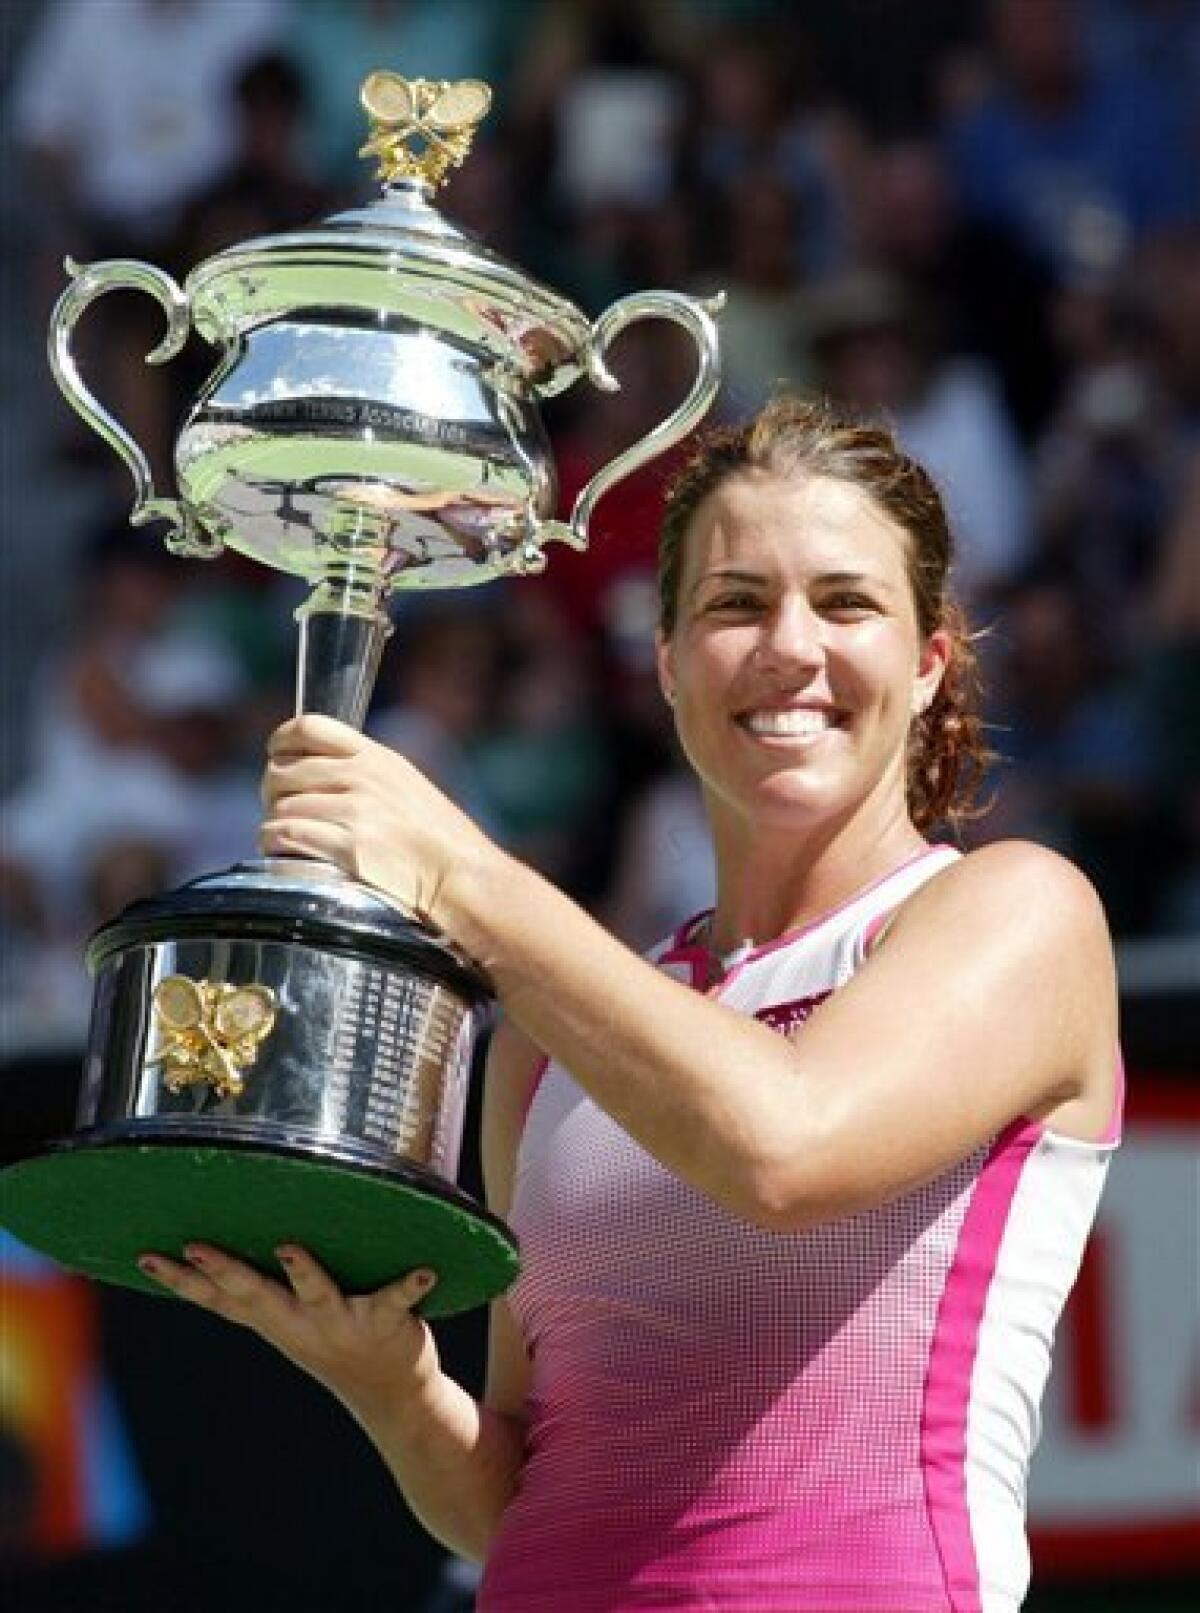 FILE - This Jan. 26, 2002 file photo shows Jennifer Capriati holding her trophy after defeating Martina Hingis in the women's singles final at the Australian Open tennis tournament in Melbourne, Australia. Capriati has been elected to the International Tennis Hall of Fame after an up-and-down career that saw her go from teen prodigy status to off-court troubles to Grand Slam champion. (AP Photo/Rick Stevens, File)